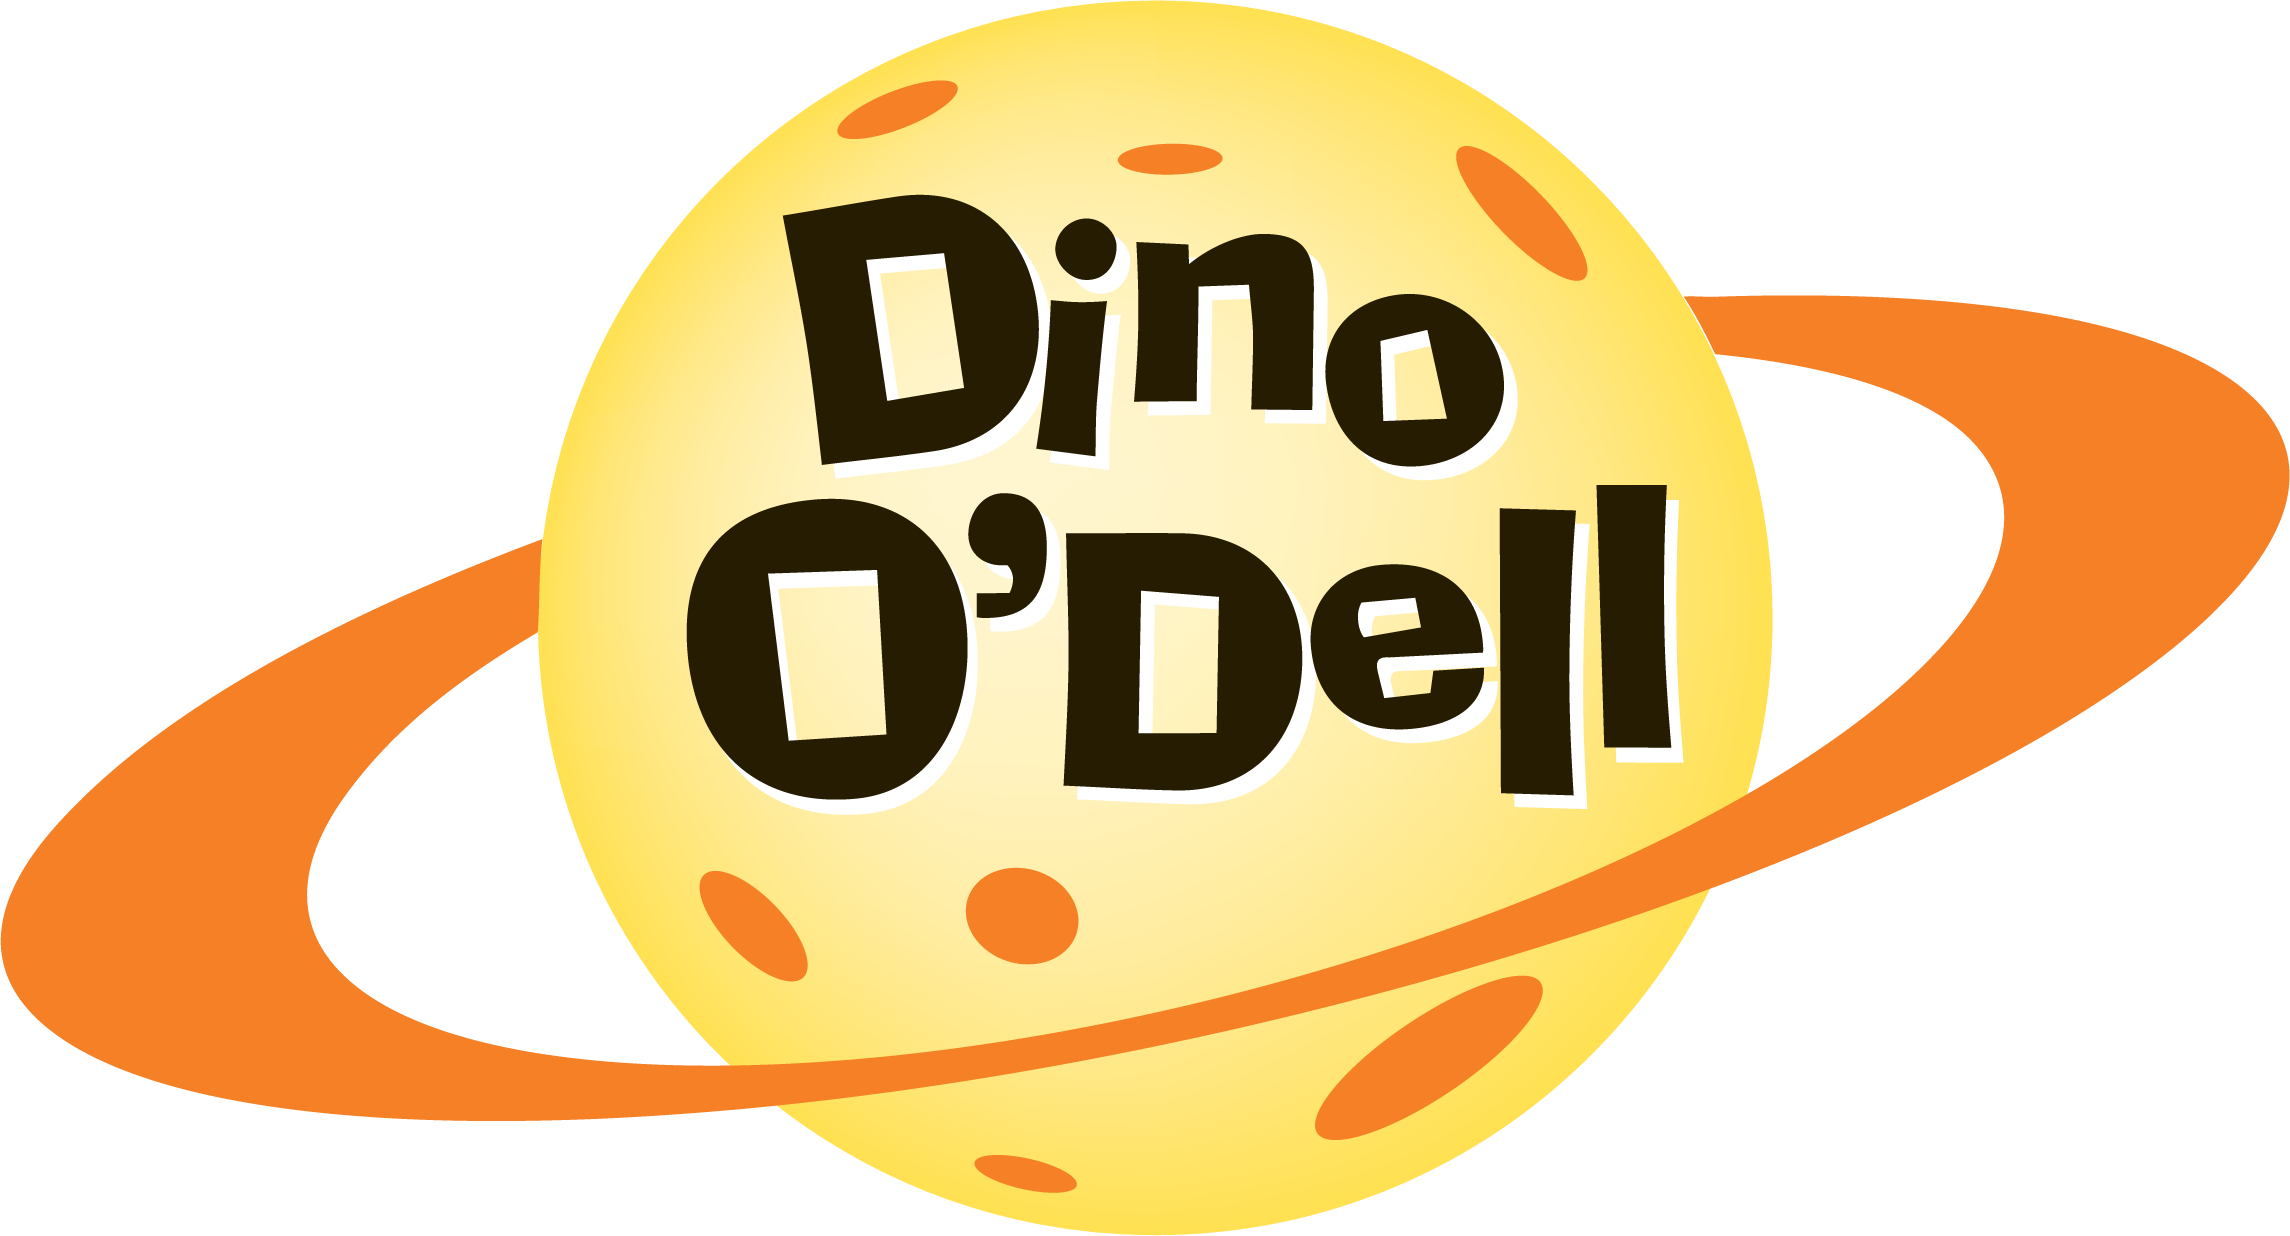 Dino O'Dell's name inside the planet Saturn